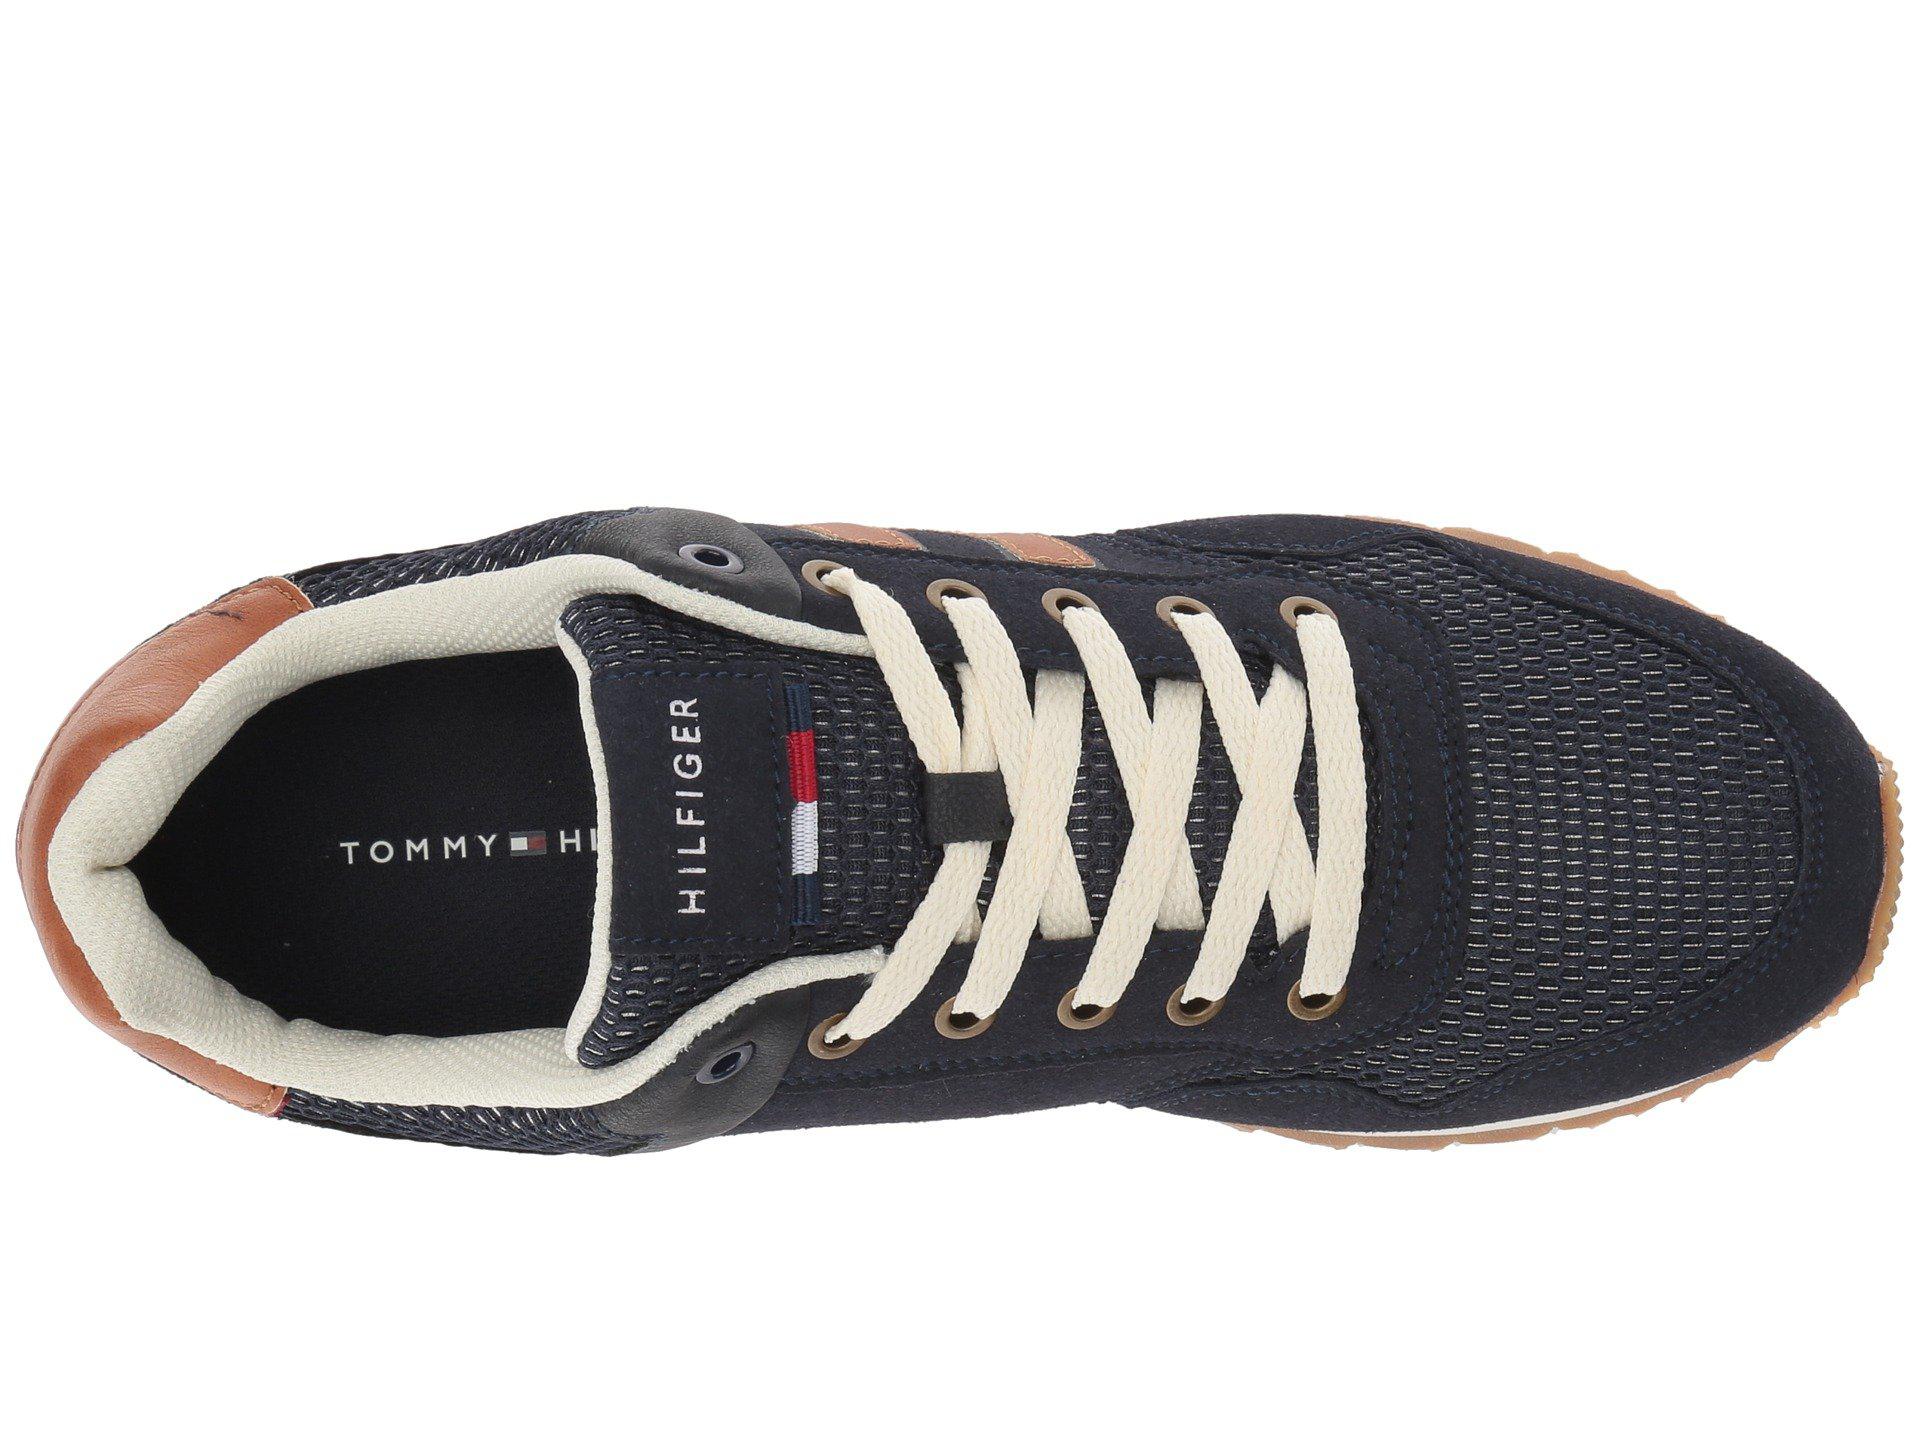 Tommy Hilfiger Synthetic Artisan in Navy (Blue) for Men - Lyst